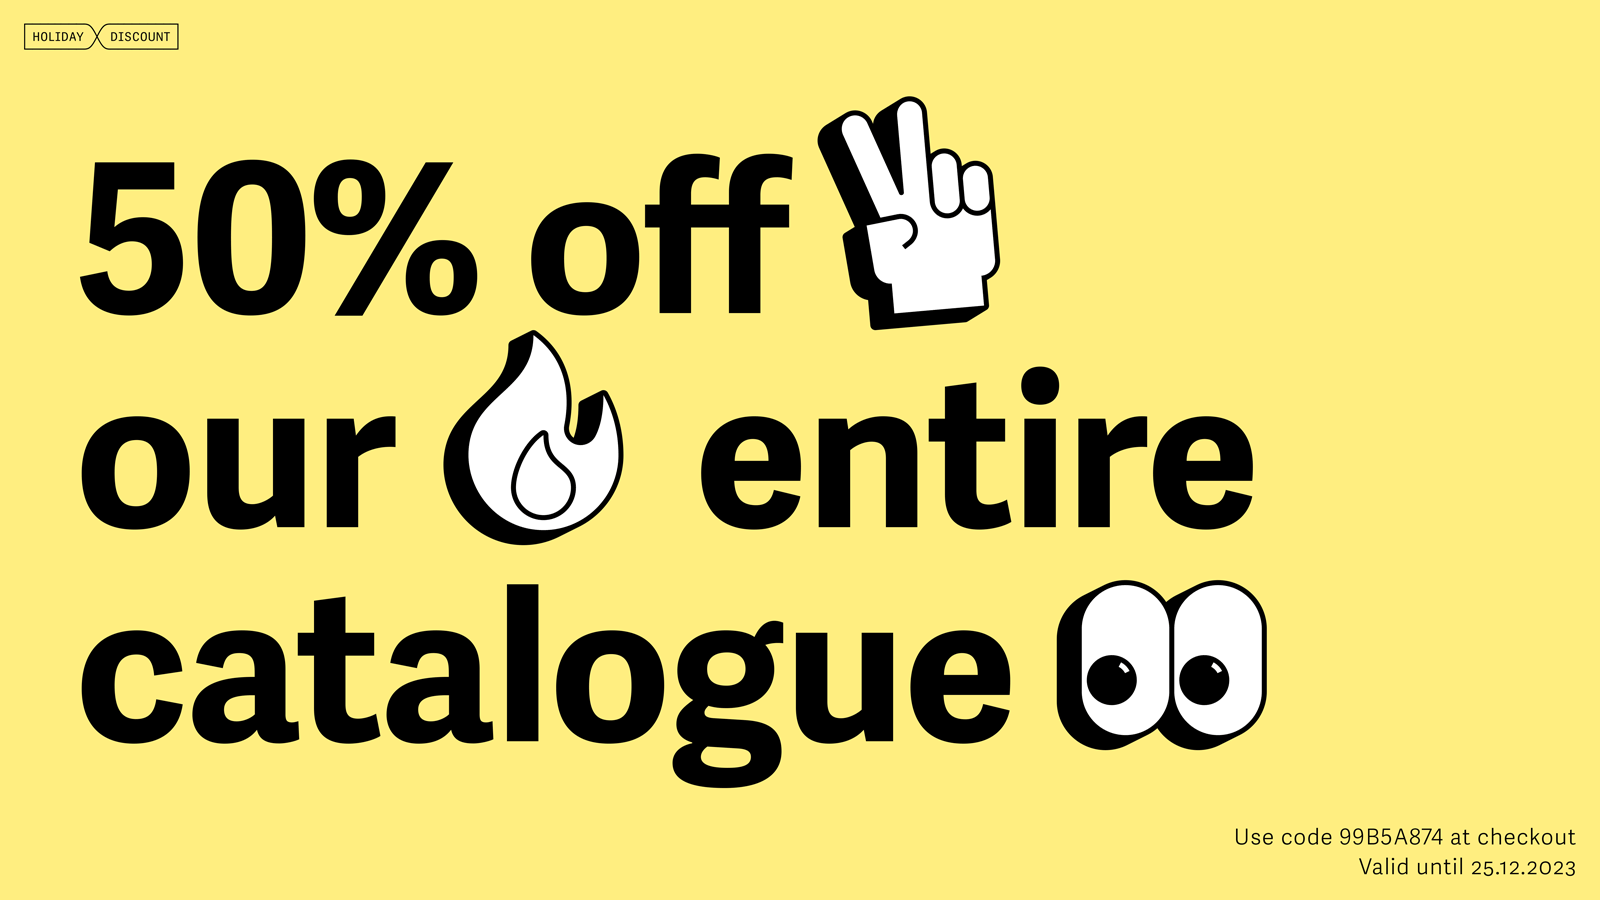 Holiday Discount 50% our entire catalogue